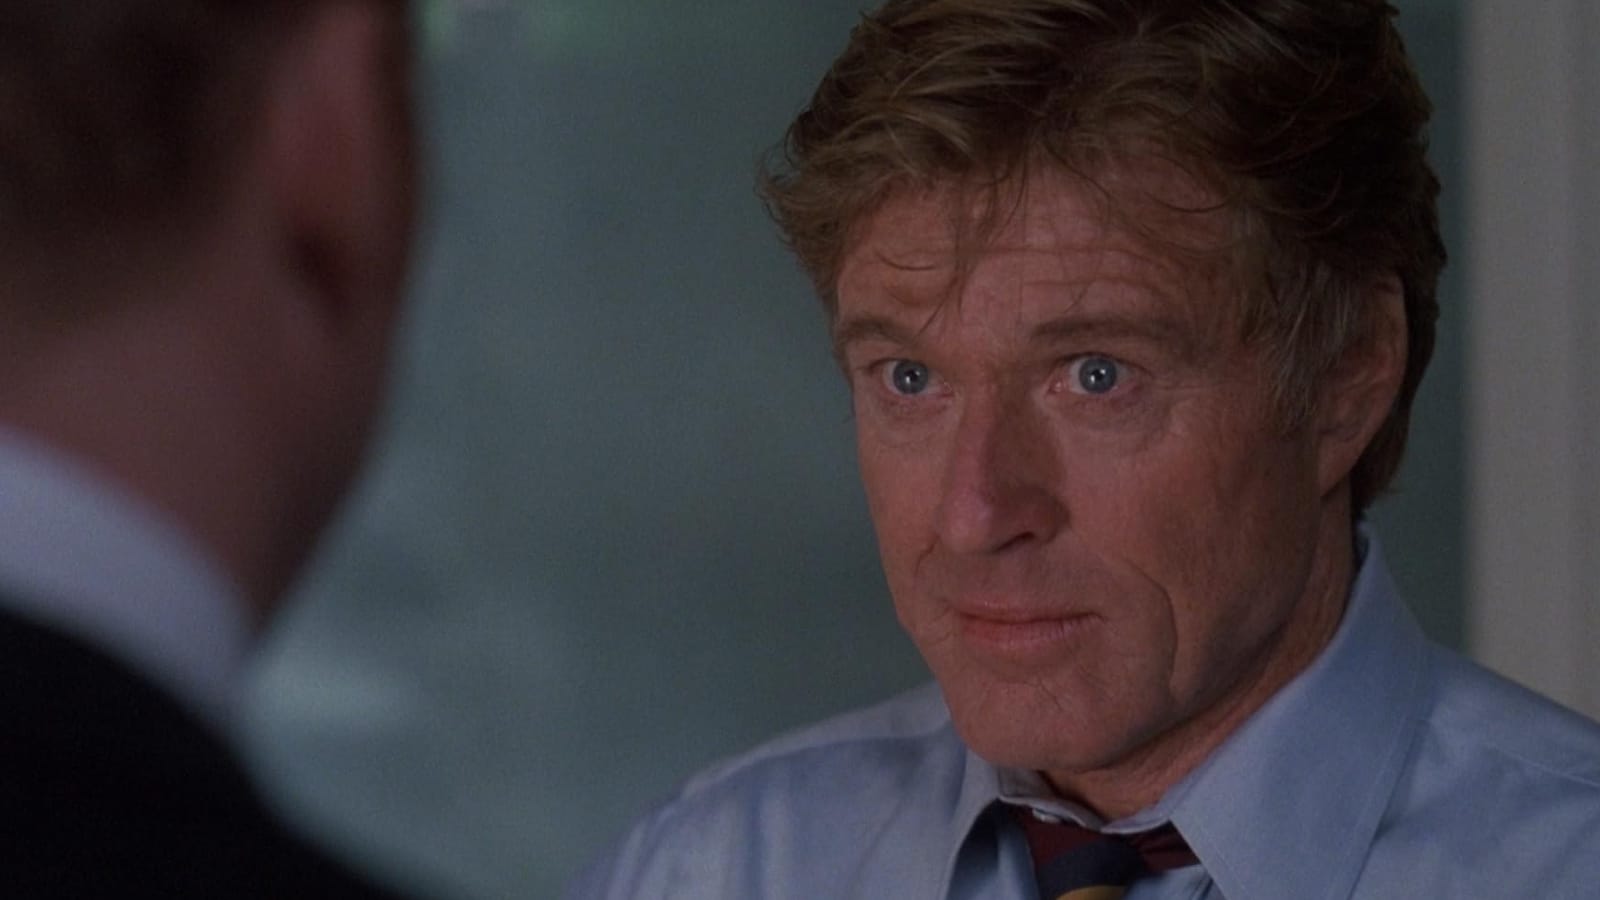 <p>With the 60s well behind him, Redford no longer carried the same subversive reputation he once had. But he still had that rebellious streak, which was put to good use in the thriller <em>Sneakers</em>. As former activist Martin Bishop, Redford leads a team of thieves and hackers who get roped into a dangerous mission by a figure from his past. Redford’s chemistry with co-stars Sydney Pointier, Mary McDonnell, and Dan Ackroyd shines, even as director Phil Alden Robinson ratchets up the tension.</p>